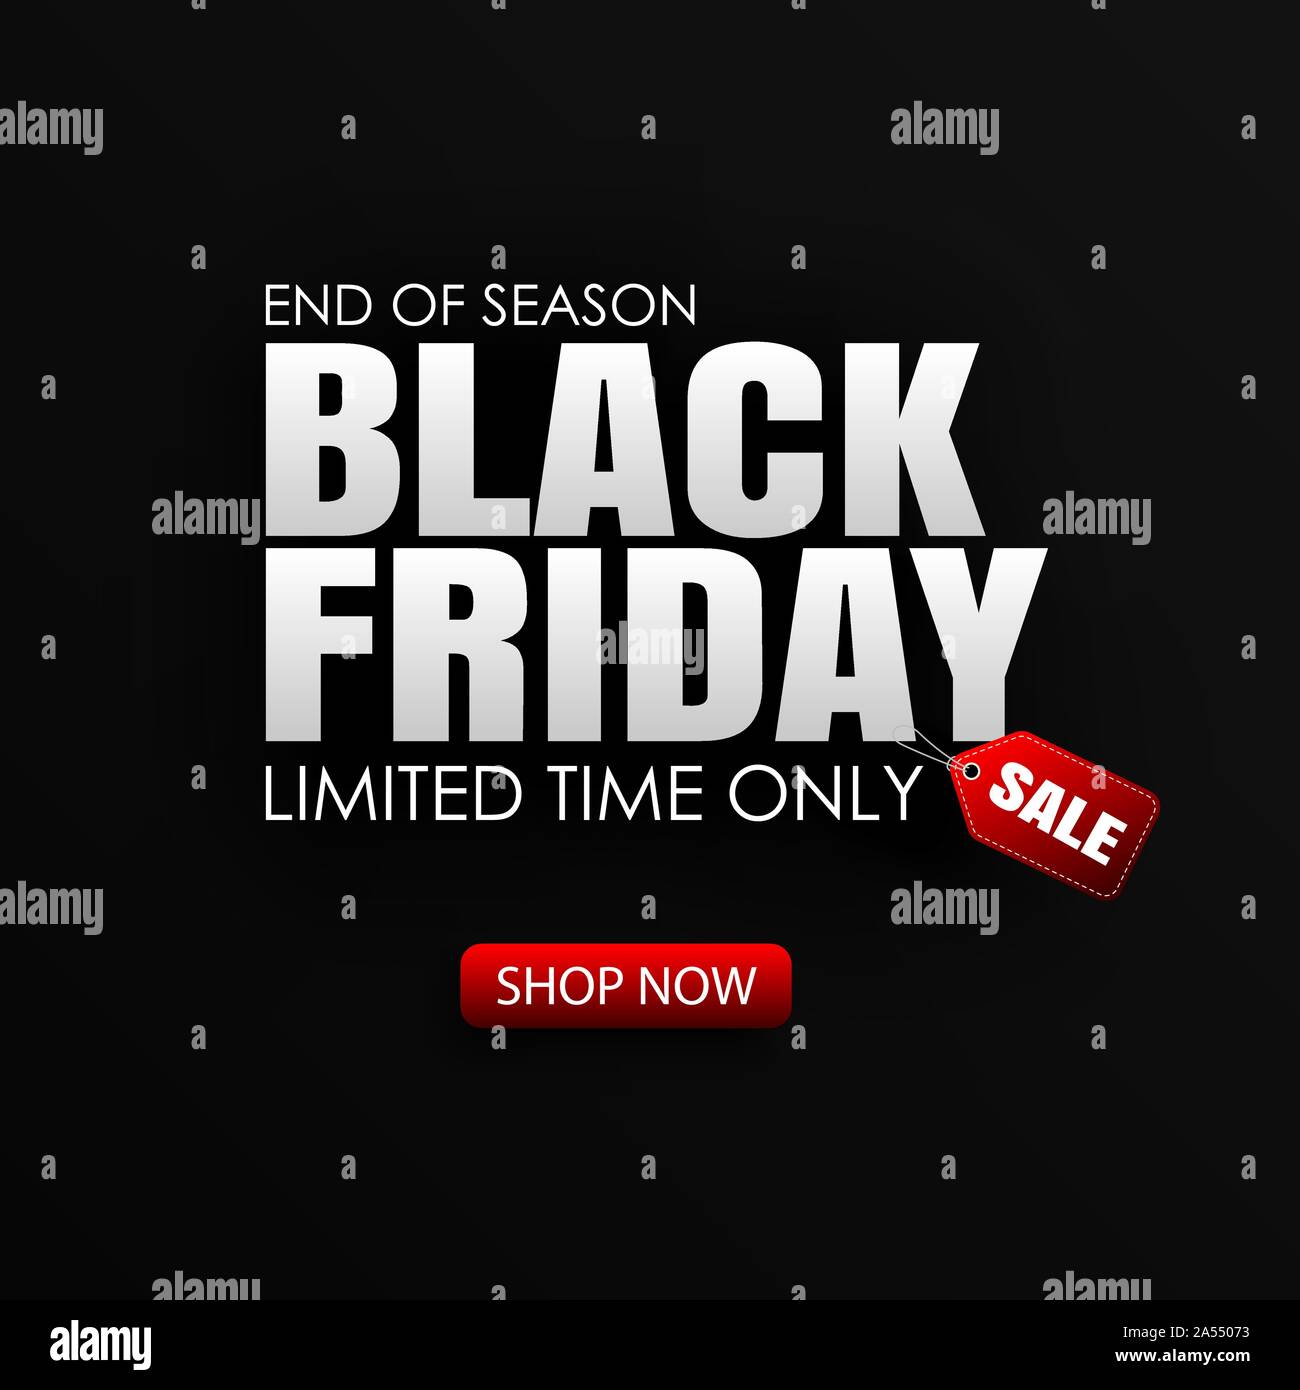 Black friday sale banner with white text on black background. Use for discount, shopping, promotion, advertising. Stock Vector